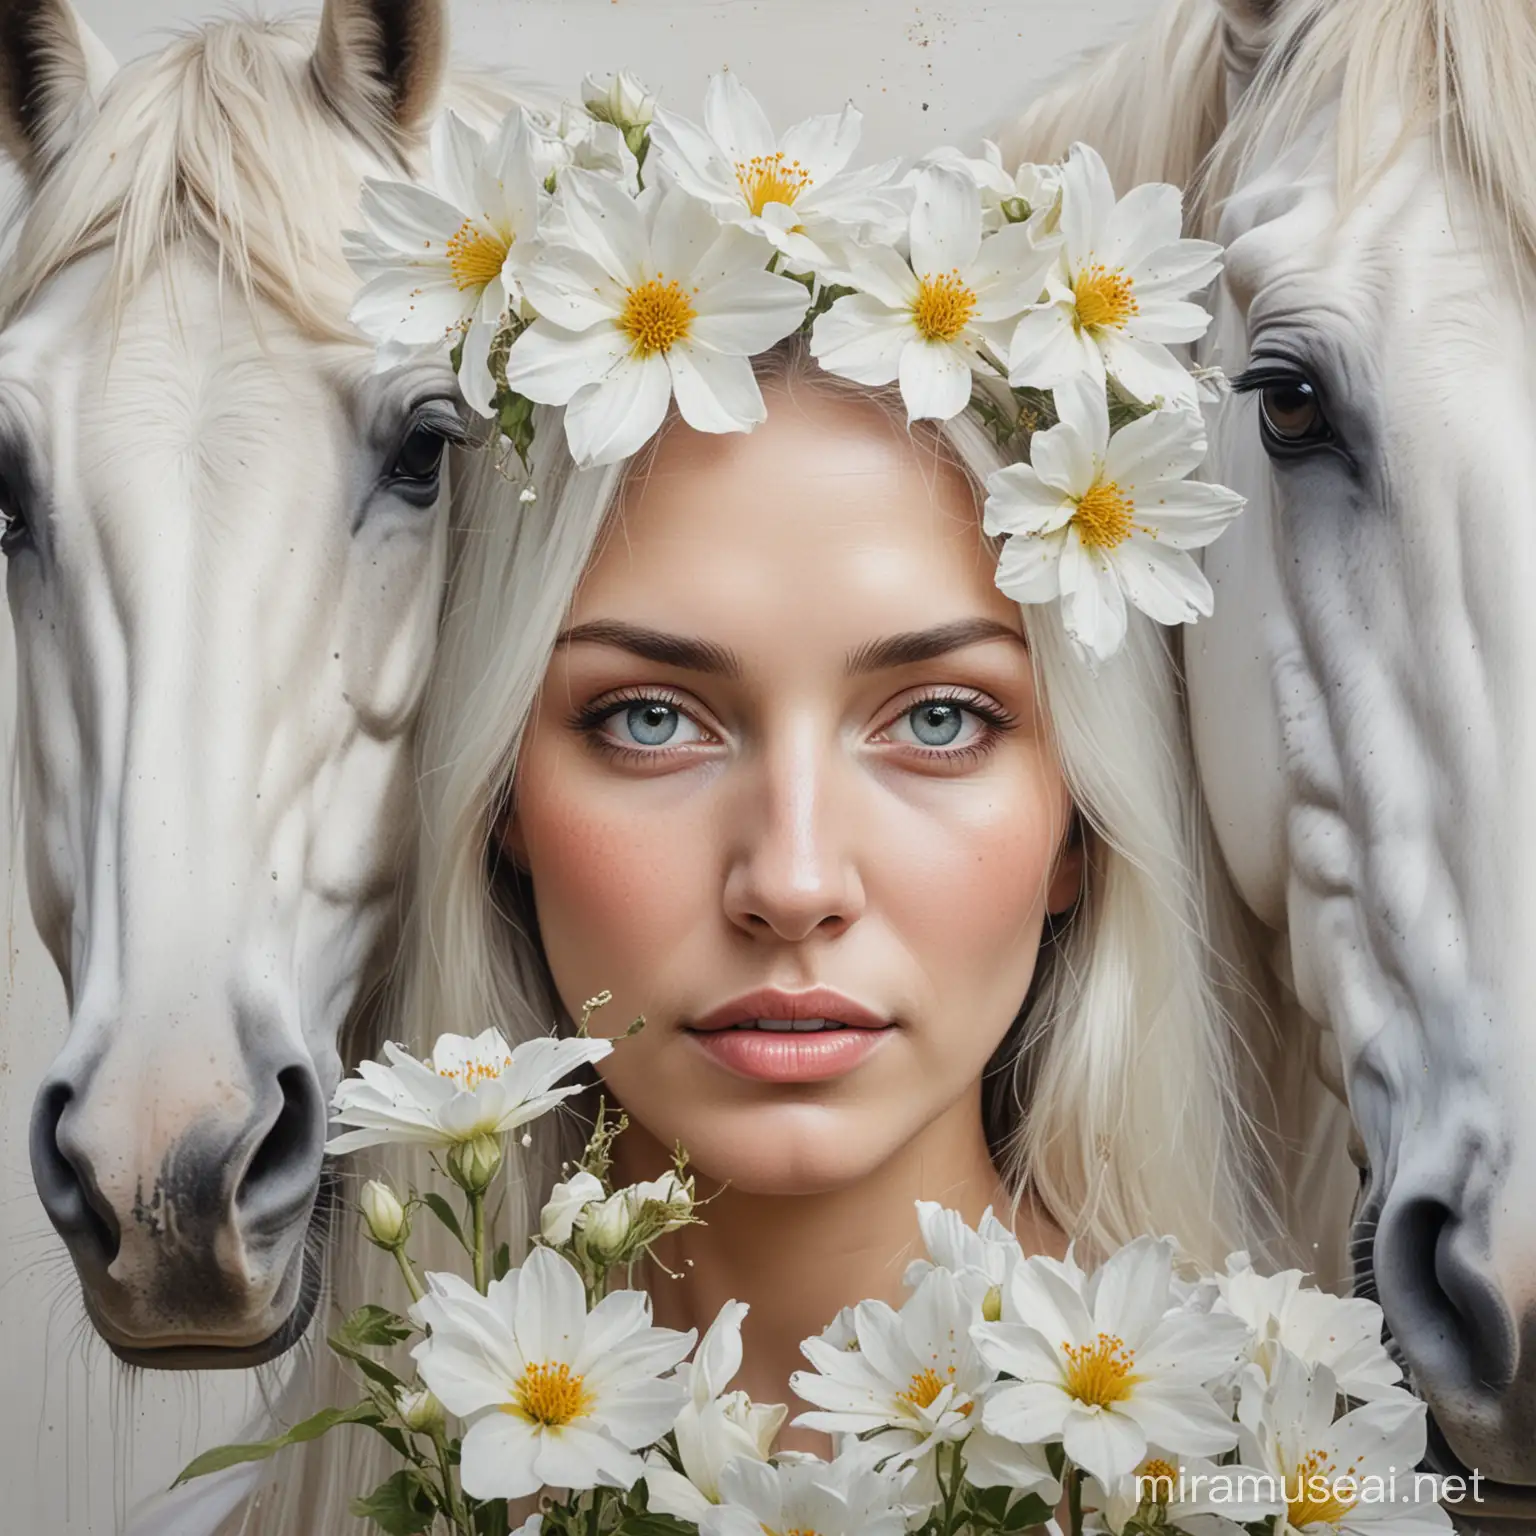 mixed media painting with lots of white of a woman's face intense eyes looking at viewer with horses and a flower of unusual proportions in the background